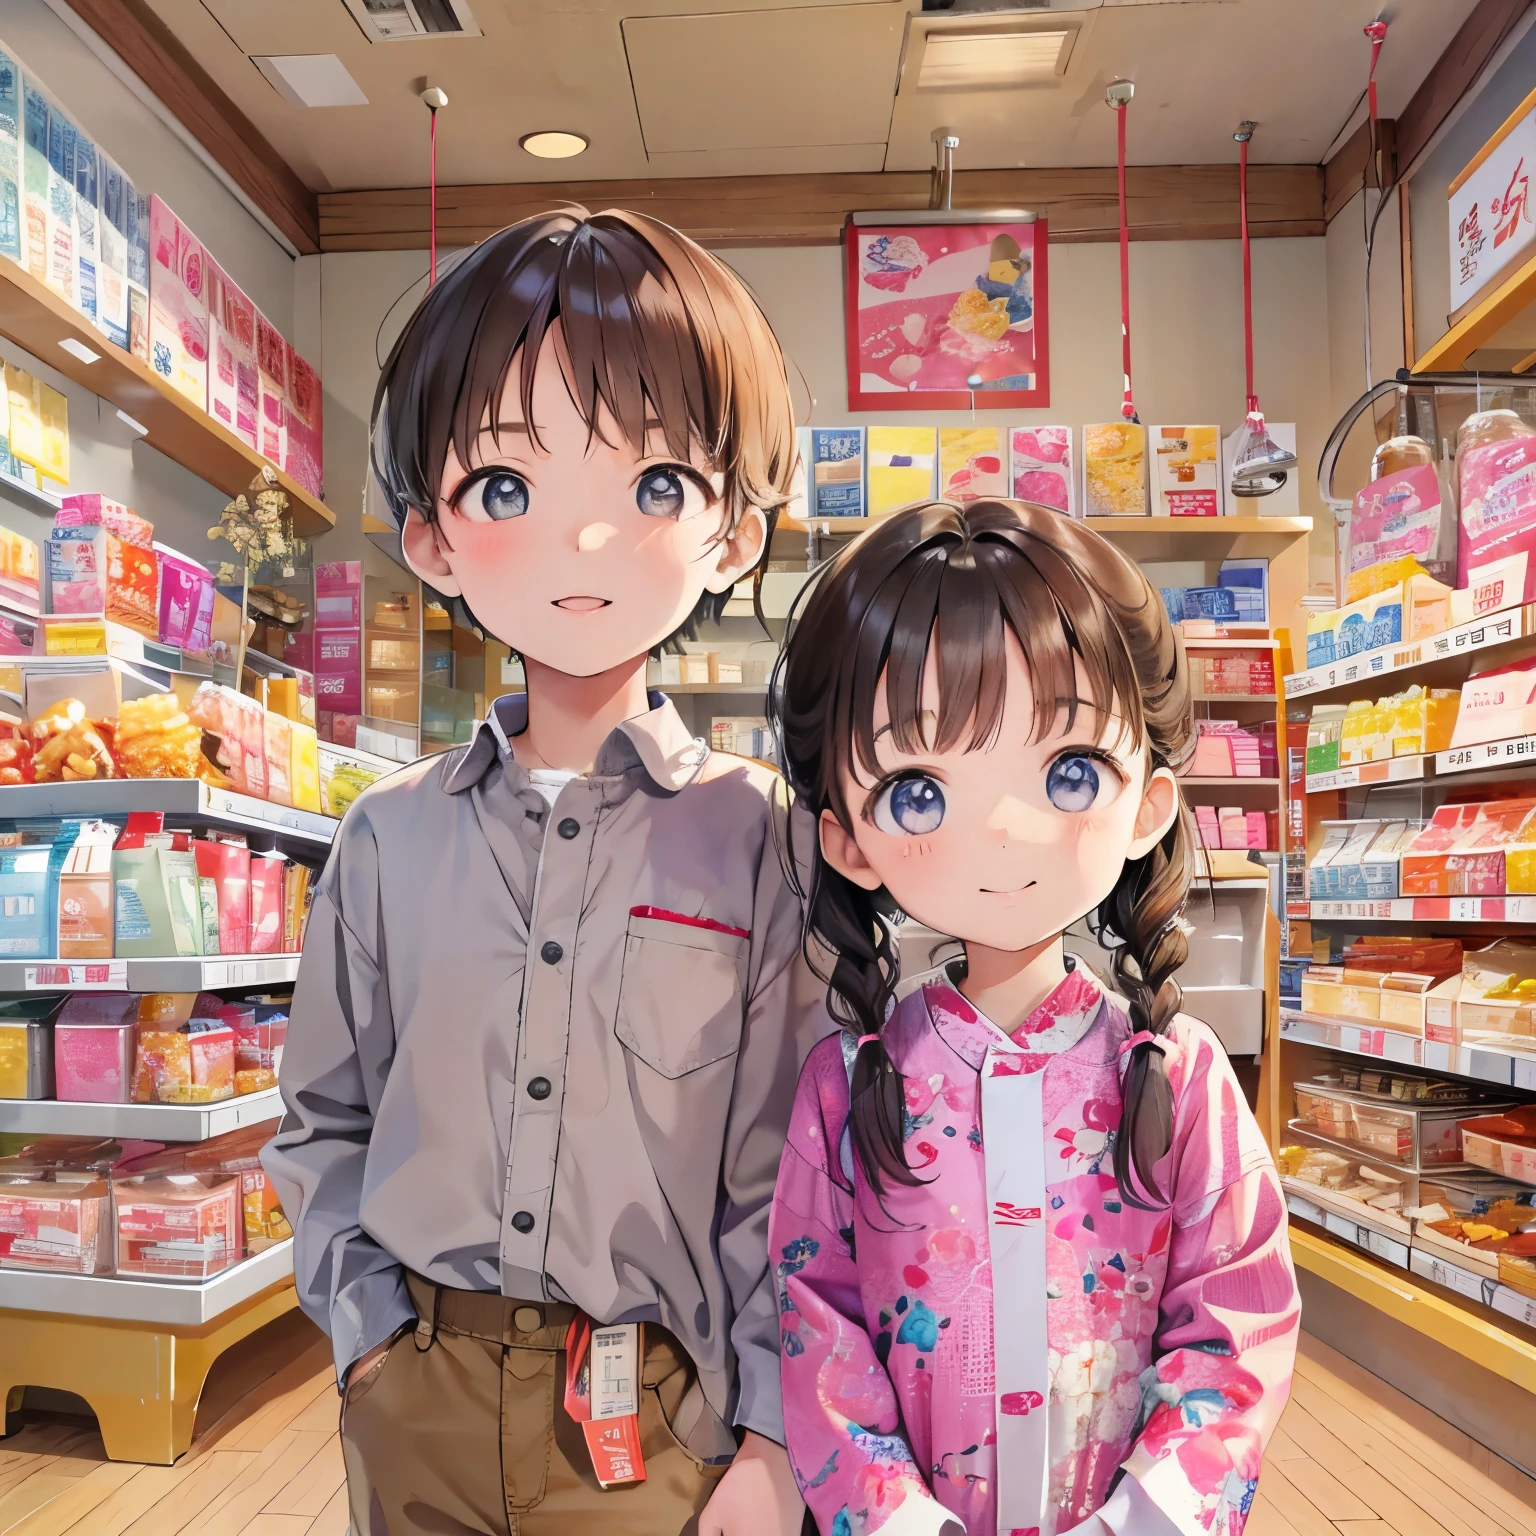 1 Korean 5-year-old boy, 1 Korean 5-year-old girl,Beloved,cute,looking at the viewer,smile,neat clothes ,product display stand background,stationery store background,the background looks good,subtle,very realistic,Free Pose,매우 subtle 얼굴, Detailed and smooth skin, beautiful face, masterpiece, highest resolution, best quality,perfect face,bright lights, Natural-looking poses,Enjoying sweets,